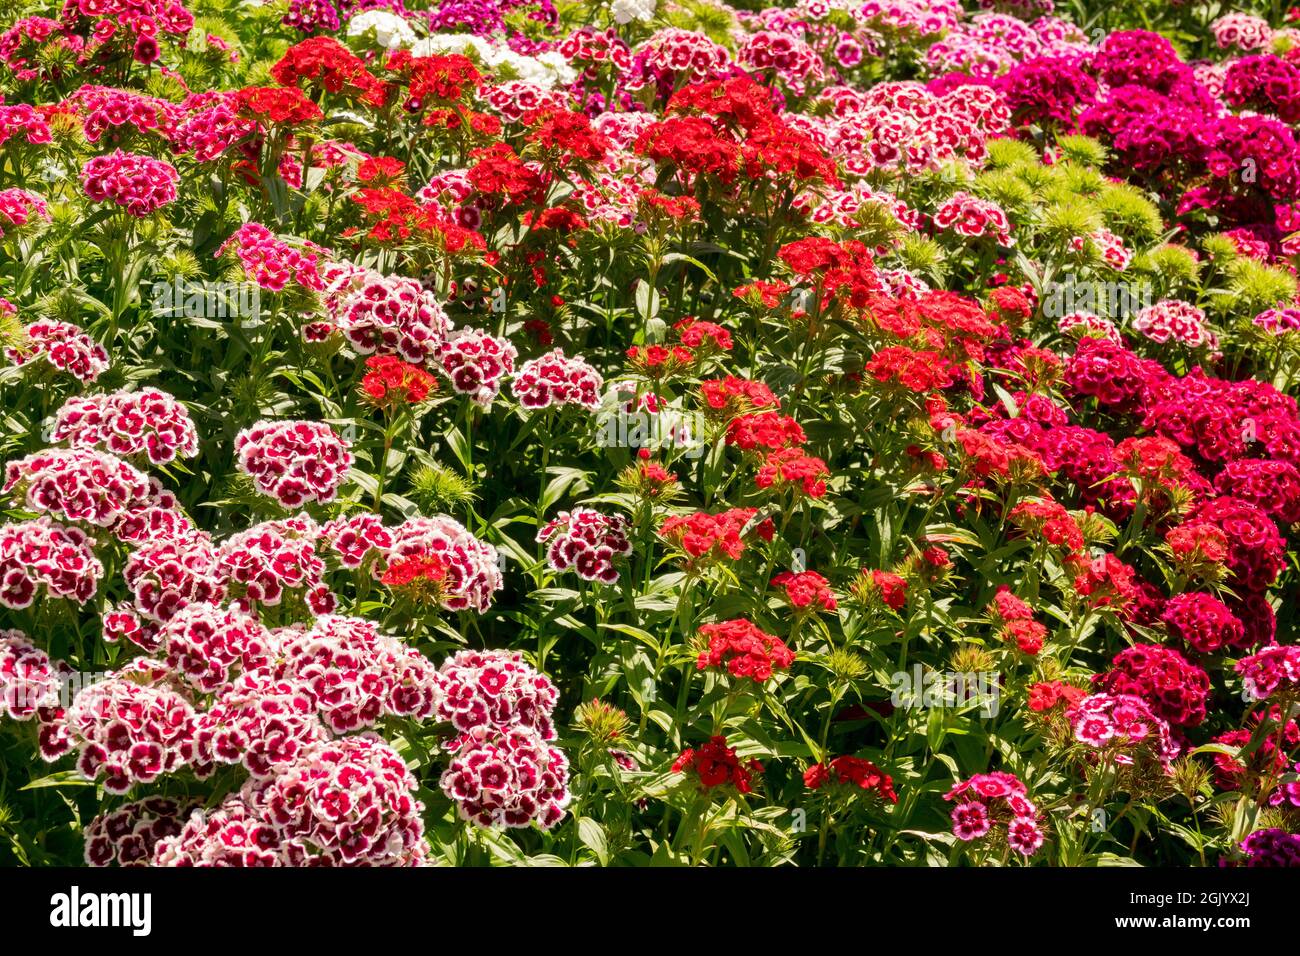 Colourful flower bed Dianthus 'Sweet William', summer bedding colourful flowers Stock Photo